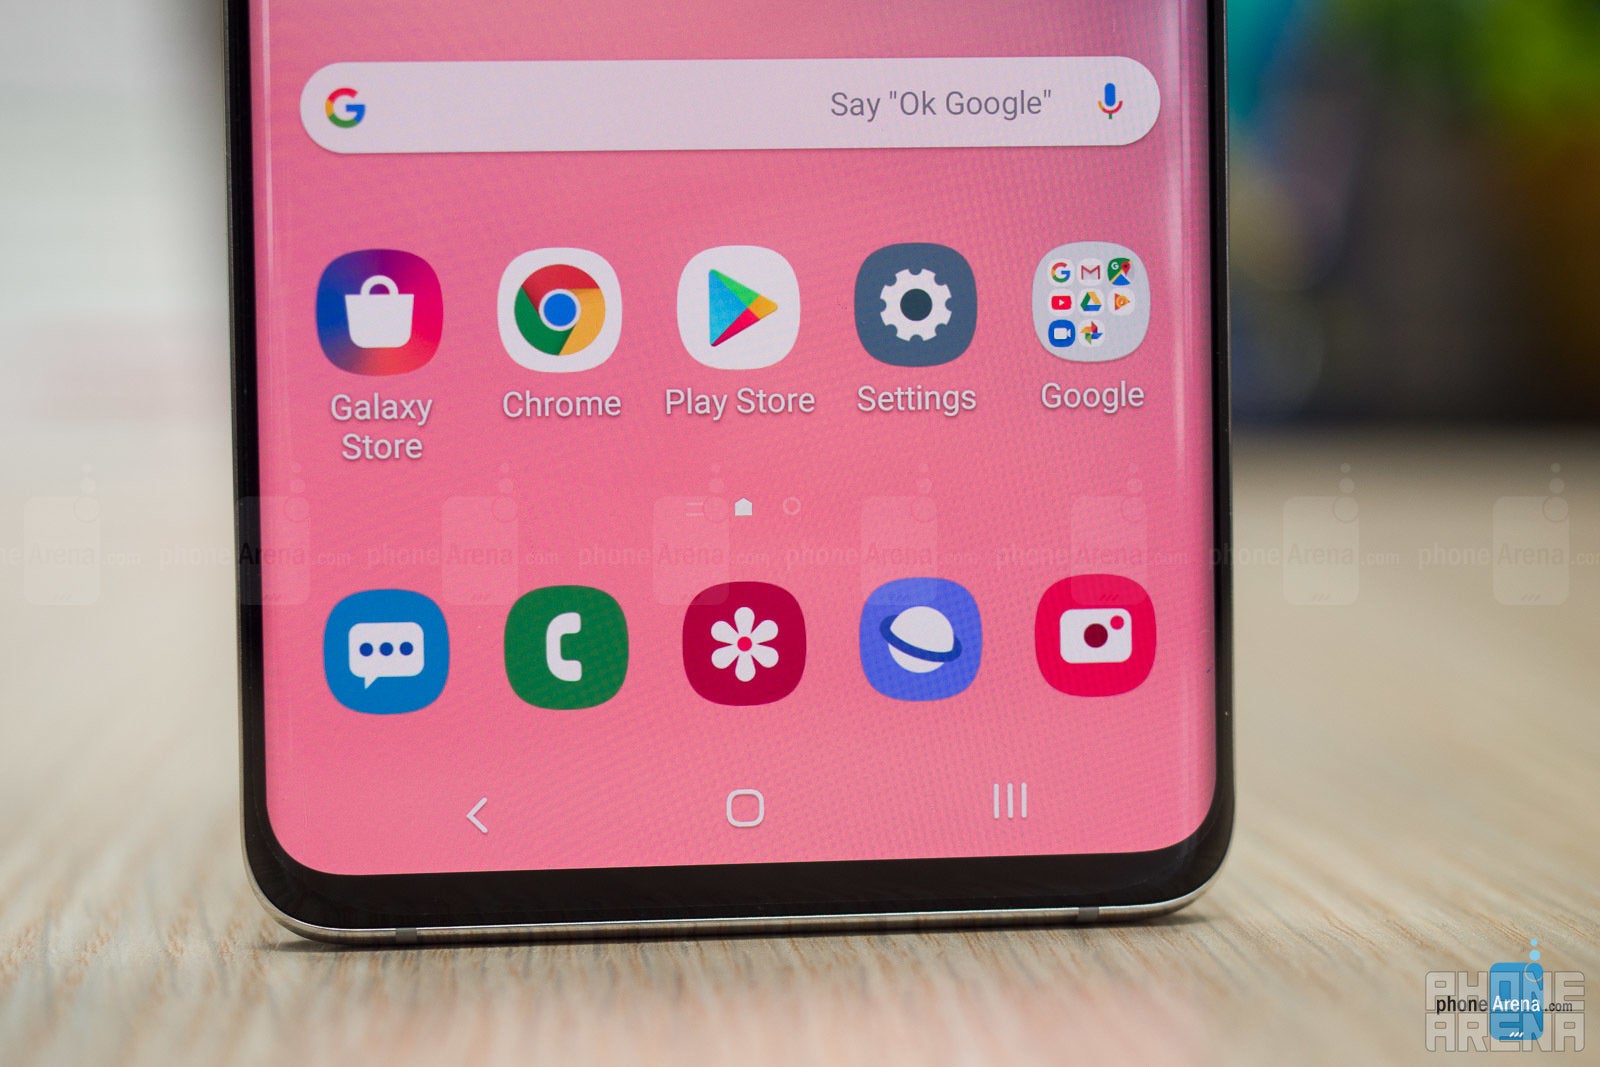 Samsung's Galaxy S11 might skip the cool design everyone wants